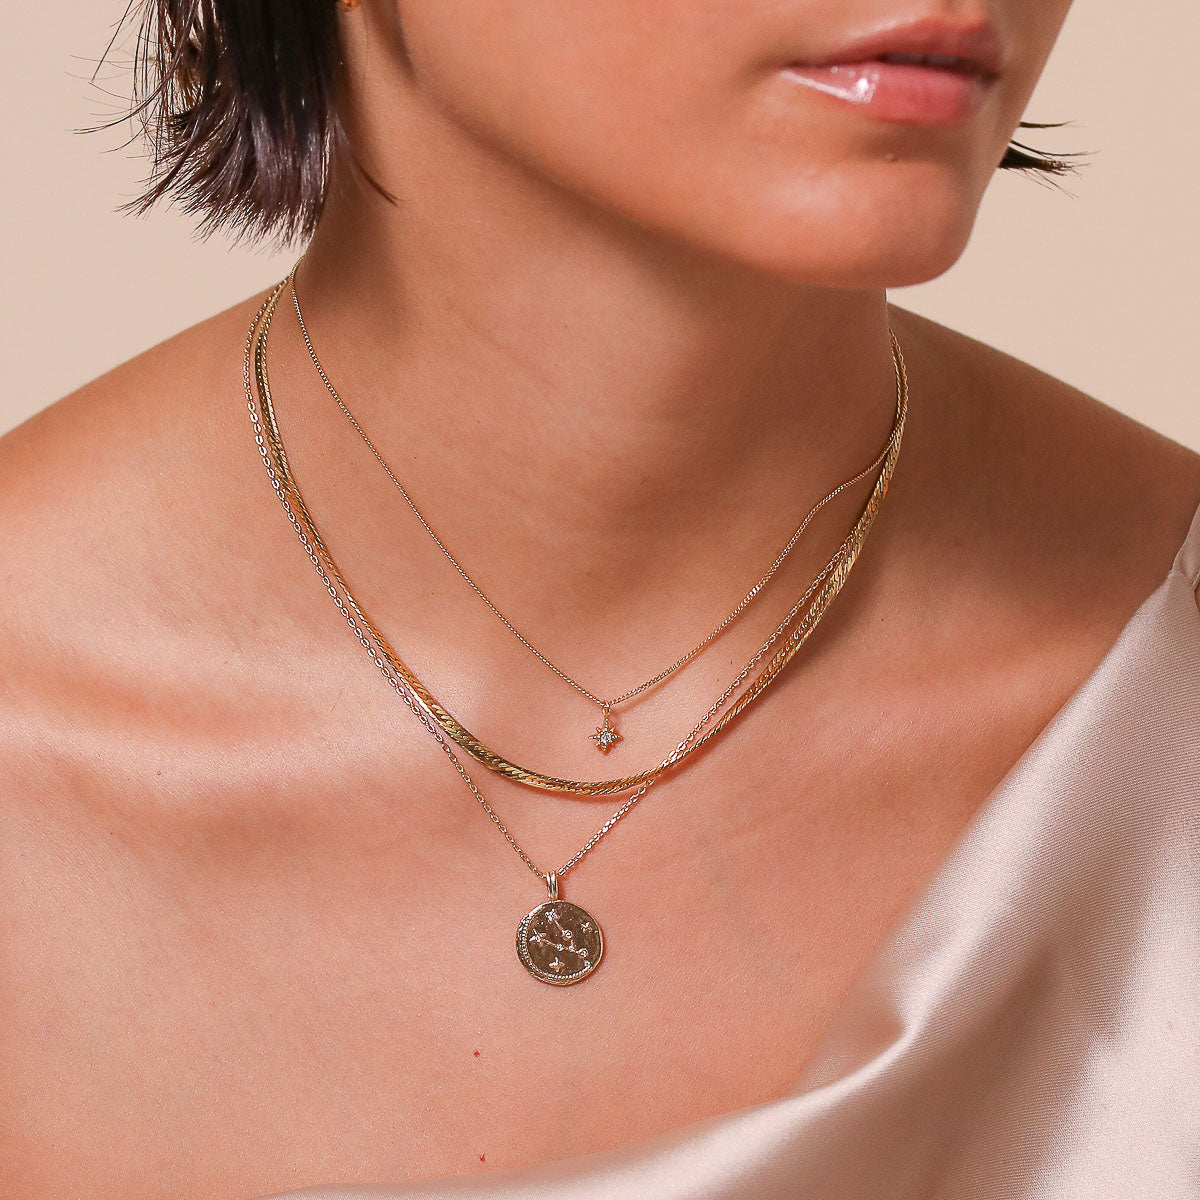 Taurus Zodiac Pendant Necklace in Gold worn layered with necklaces